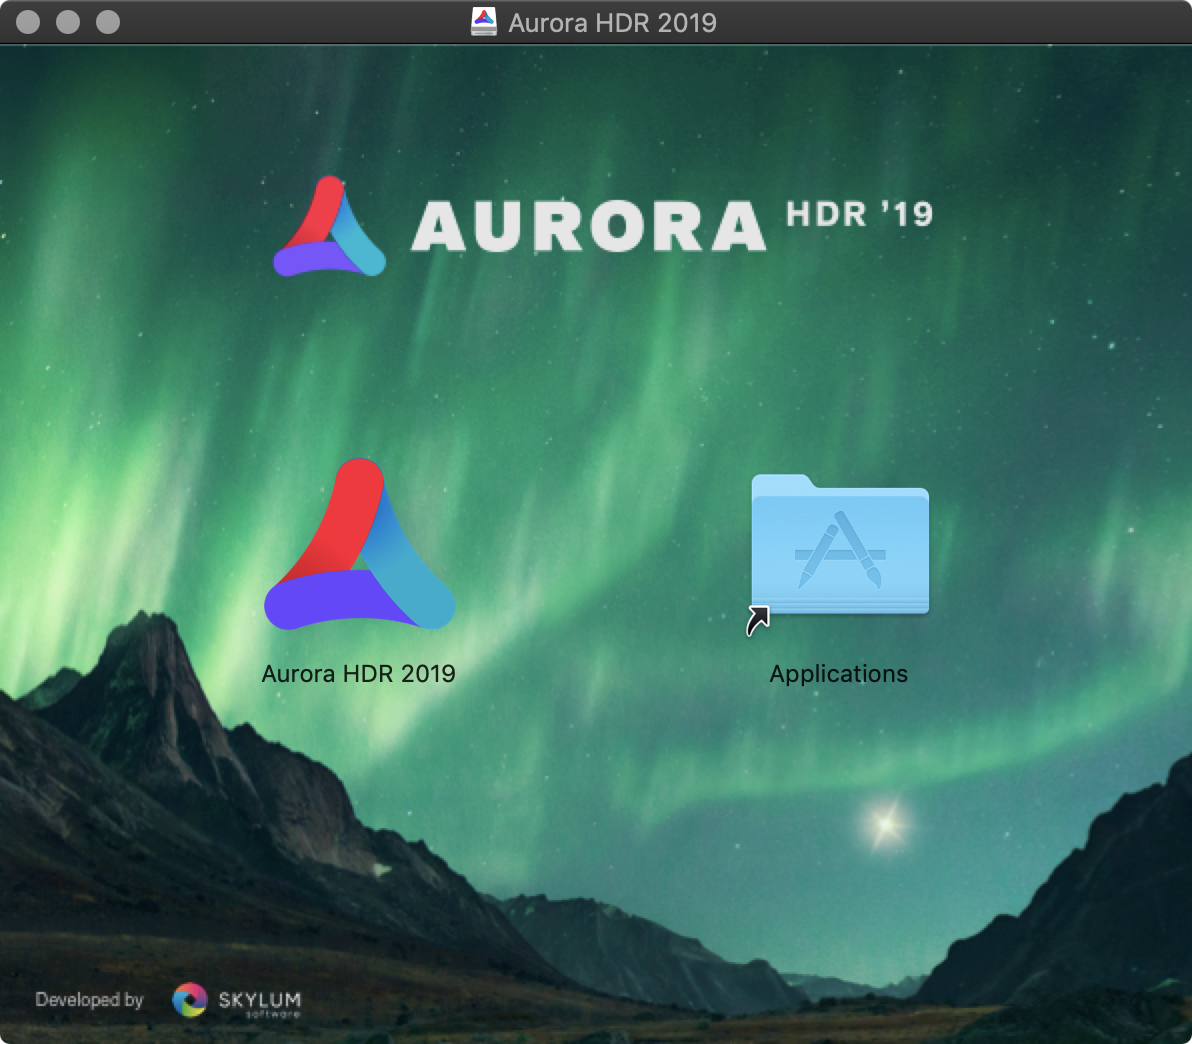 installing aurora hdr 2019 as a plugin for photoshop